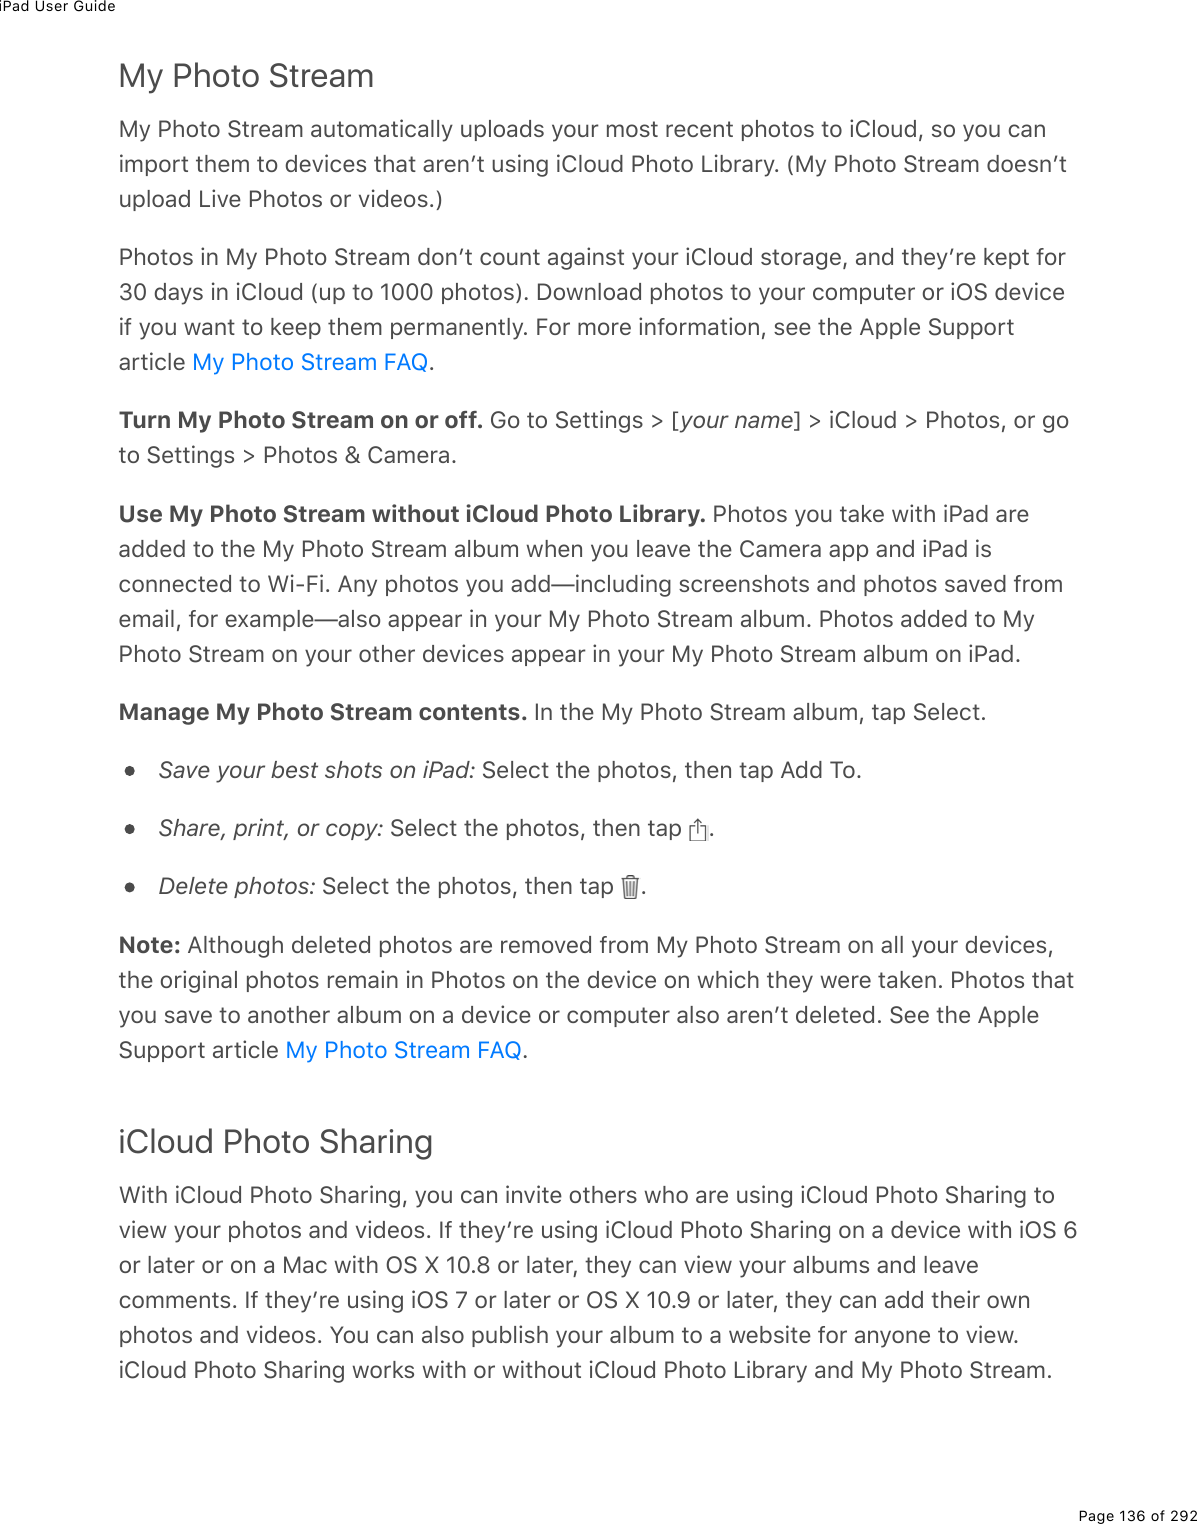 iPad User GuidePage 136 of 292My Photo StreamMy Photo Stream automatically uploads your most recent photos to iCloud, so you canimport them to devices that arenʼt using iCloud Photo Library. (My Photo Stream doesnʼtupload Live Photos or videos.)Photos in My Photo Stream donʼt count against your iCloud storage, and theyʼre kept for30 days in iCloud (up to 1000 photos). Download photos to your computer or iOS deviceif you want to keep them permanently. For more information, see the Apple Supportarticle  .Turn My Photo Stream on or off. Go to Settings &gt; [your name] &gt; iCloud &gt; Photos, or goto Settings &gt; Photos &amp; Camera.Use My Photo Stream without iCloud Photo Library. Photos you take with iPad areadded to the My Photo Stream album when you leave the Camera app and iPad isconnected to Wi-Fi. Any photos you add—including screenshots and photos saved fromemail, for example—also appear in your My Photo Stream album. Photos added to MyPhoto Stream on your other devices appear in your My Photo Stream album on iPad.Manage My Photo Stream contents. In the My Photo Stream album, tap Select.Save your best shots on iPad: Select the photos, then tap Add To.Share, print, or copy: Select the photos, then tap  .Delete photos: Select the photos, then tap  .Note: Although deleted photos are removed from My Photo Stream on all your devices,the original photos remain in Photos on the device on which they were taken. Photos thatyou save to another album on a device or computer also arenʼt deleted. See the AppleSupport article  .iCloud Photo SharingWith iCloud Photo Sharing, you can invite others who are using iCloud Photo Sharing toview your photos and videos. If theyʼre using iCloud Photo Sharing on a device with iOS 6or later or on a Mac with OS X 10.8 or later, they can view your albums and leavecomments. If theyʼre using iOS 7 or later or OS X 10.9 or later, they can add their ownphotos and videos. You can also publish your album to a website for anyone to view.iCloud Photo Sharing works with or without iCloud Photo Library and My Photo Stream.My Photo Stream FAQMy Photo Stream FAQ